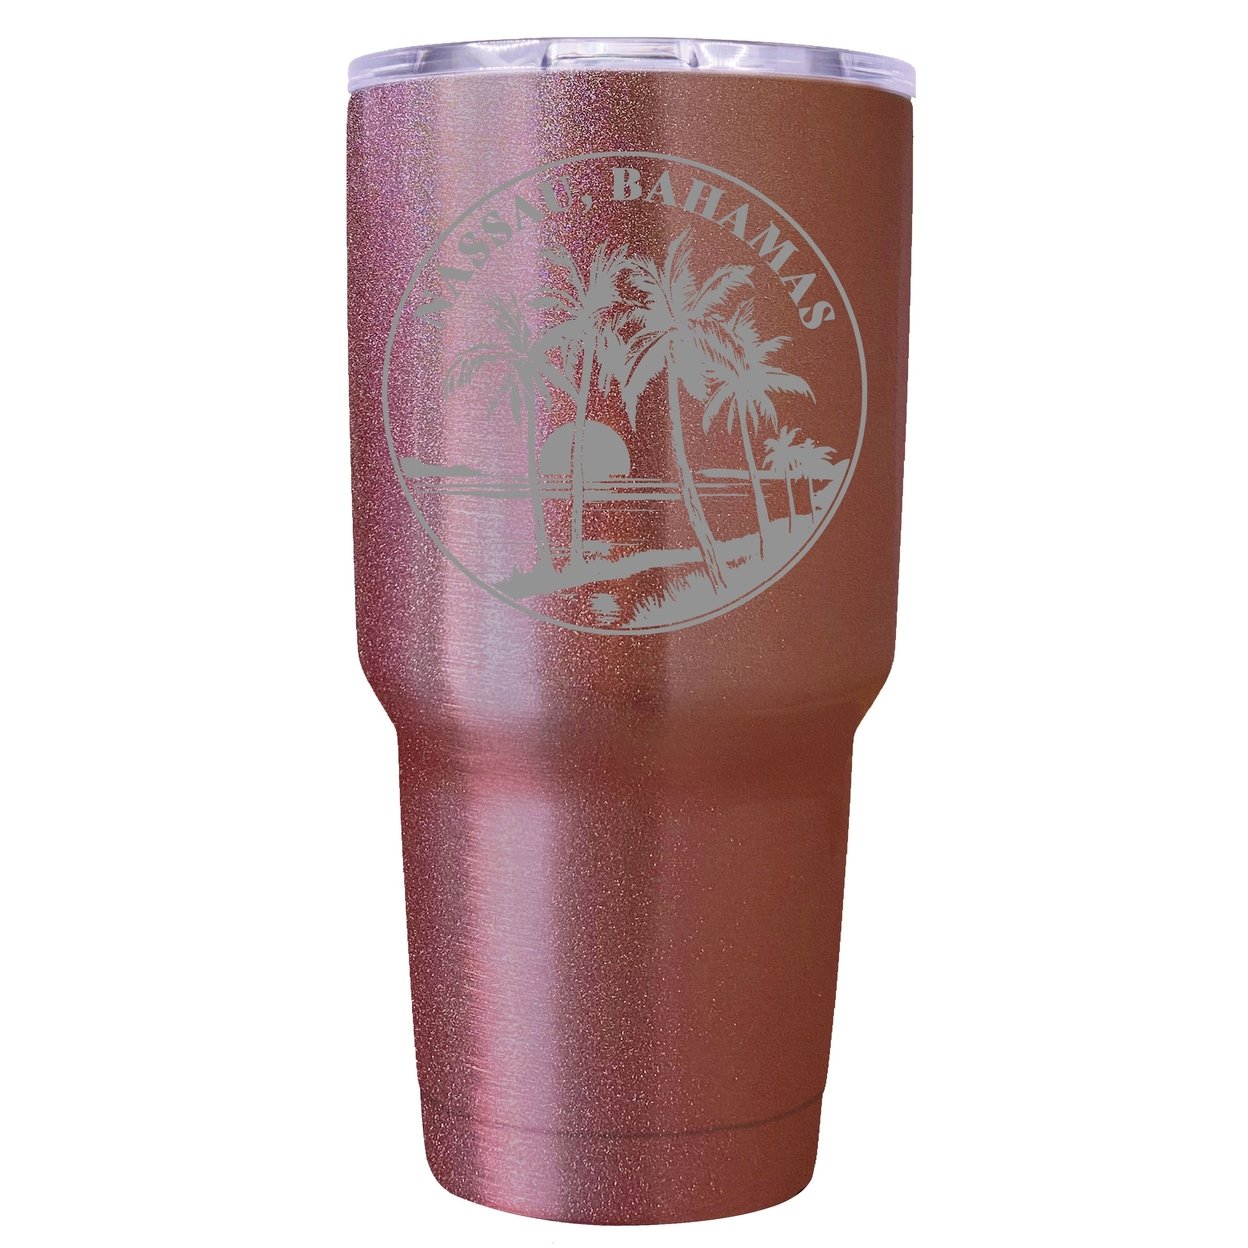 Nassau The Bahamas Souvenir 24 Oz Engraved Insulated Stainless Steel Tumbler - Black,,4-Pack